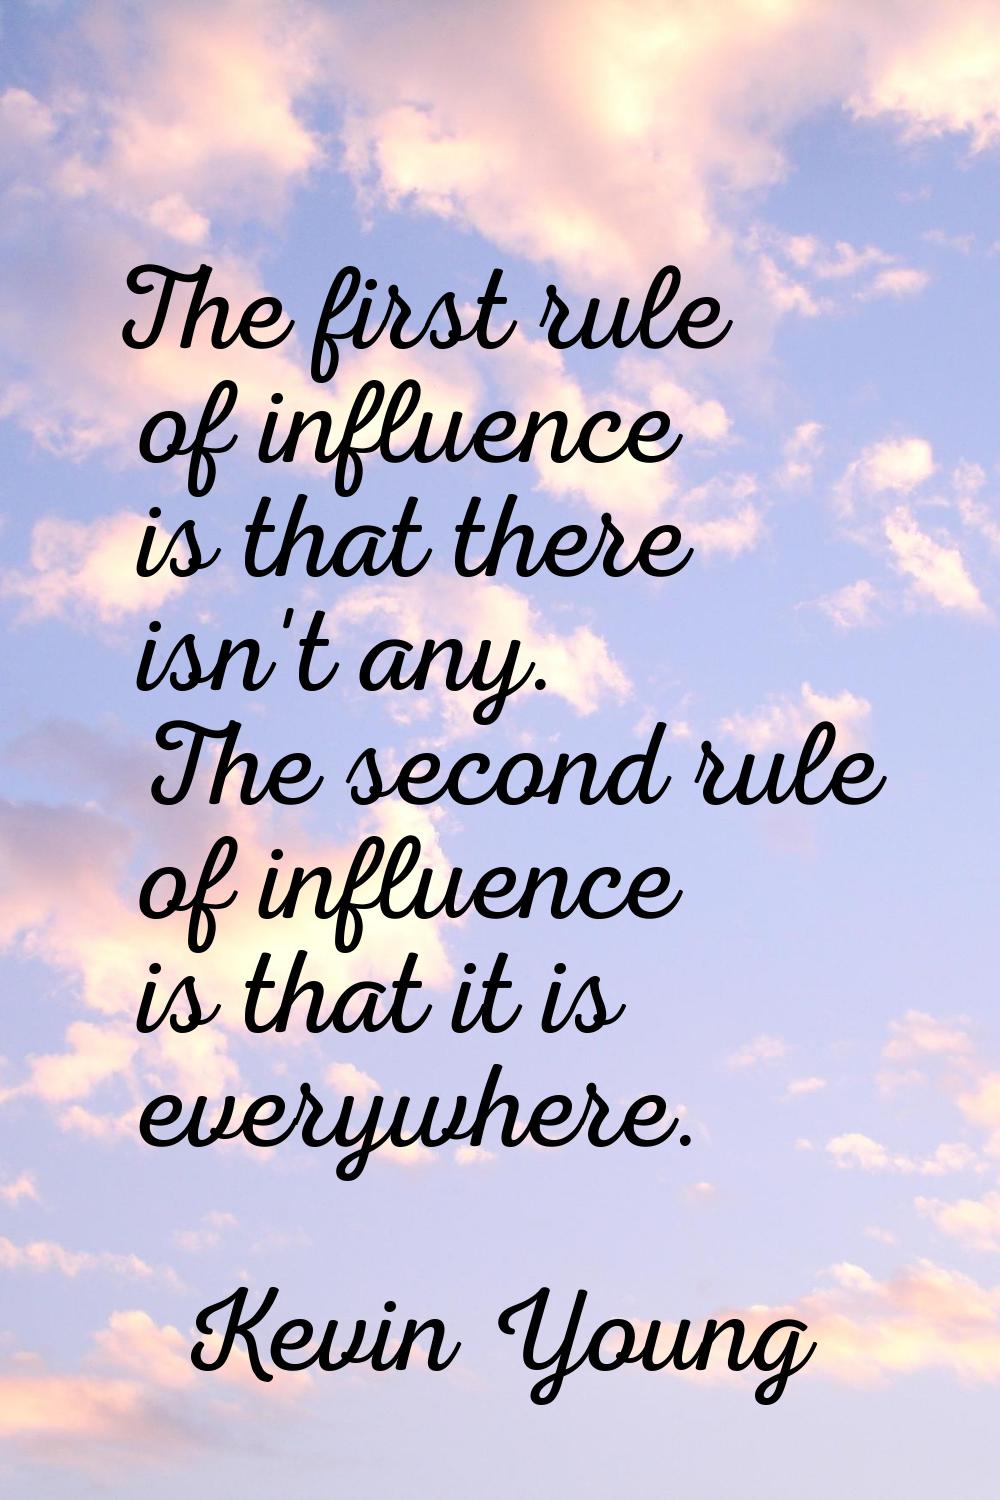 The first rule of influence is that there isn't any. The second rule of influence is that it is eve